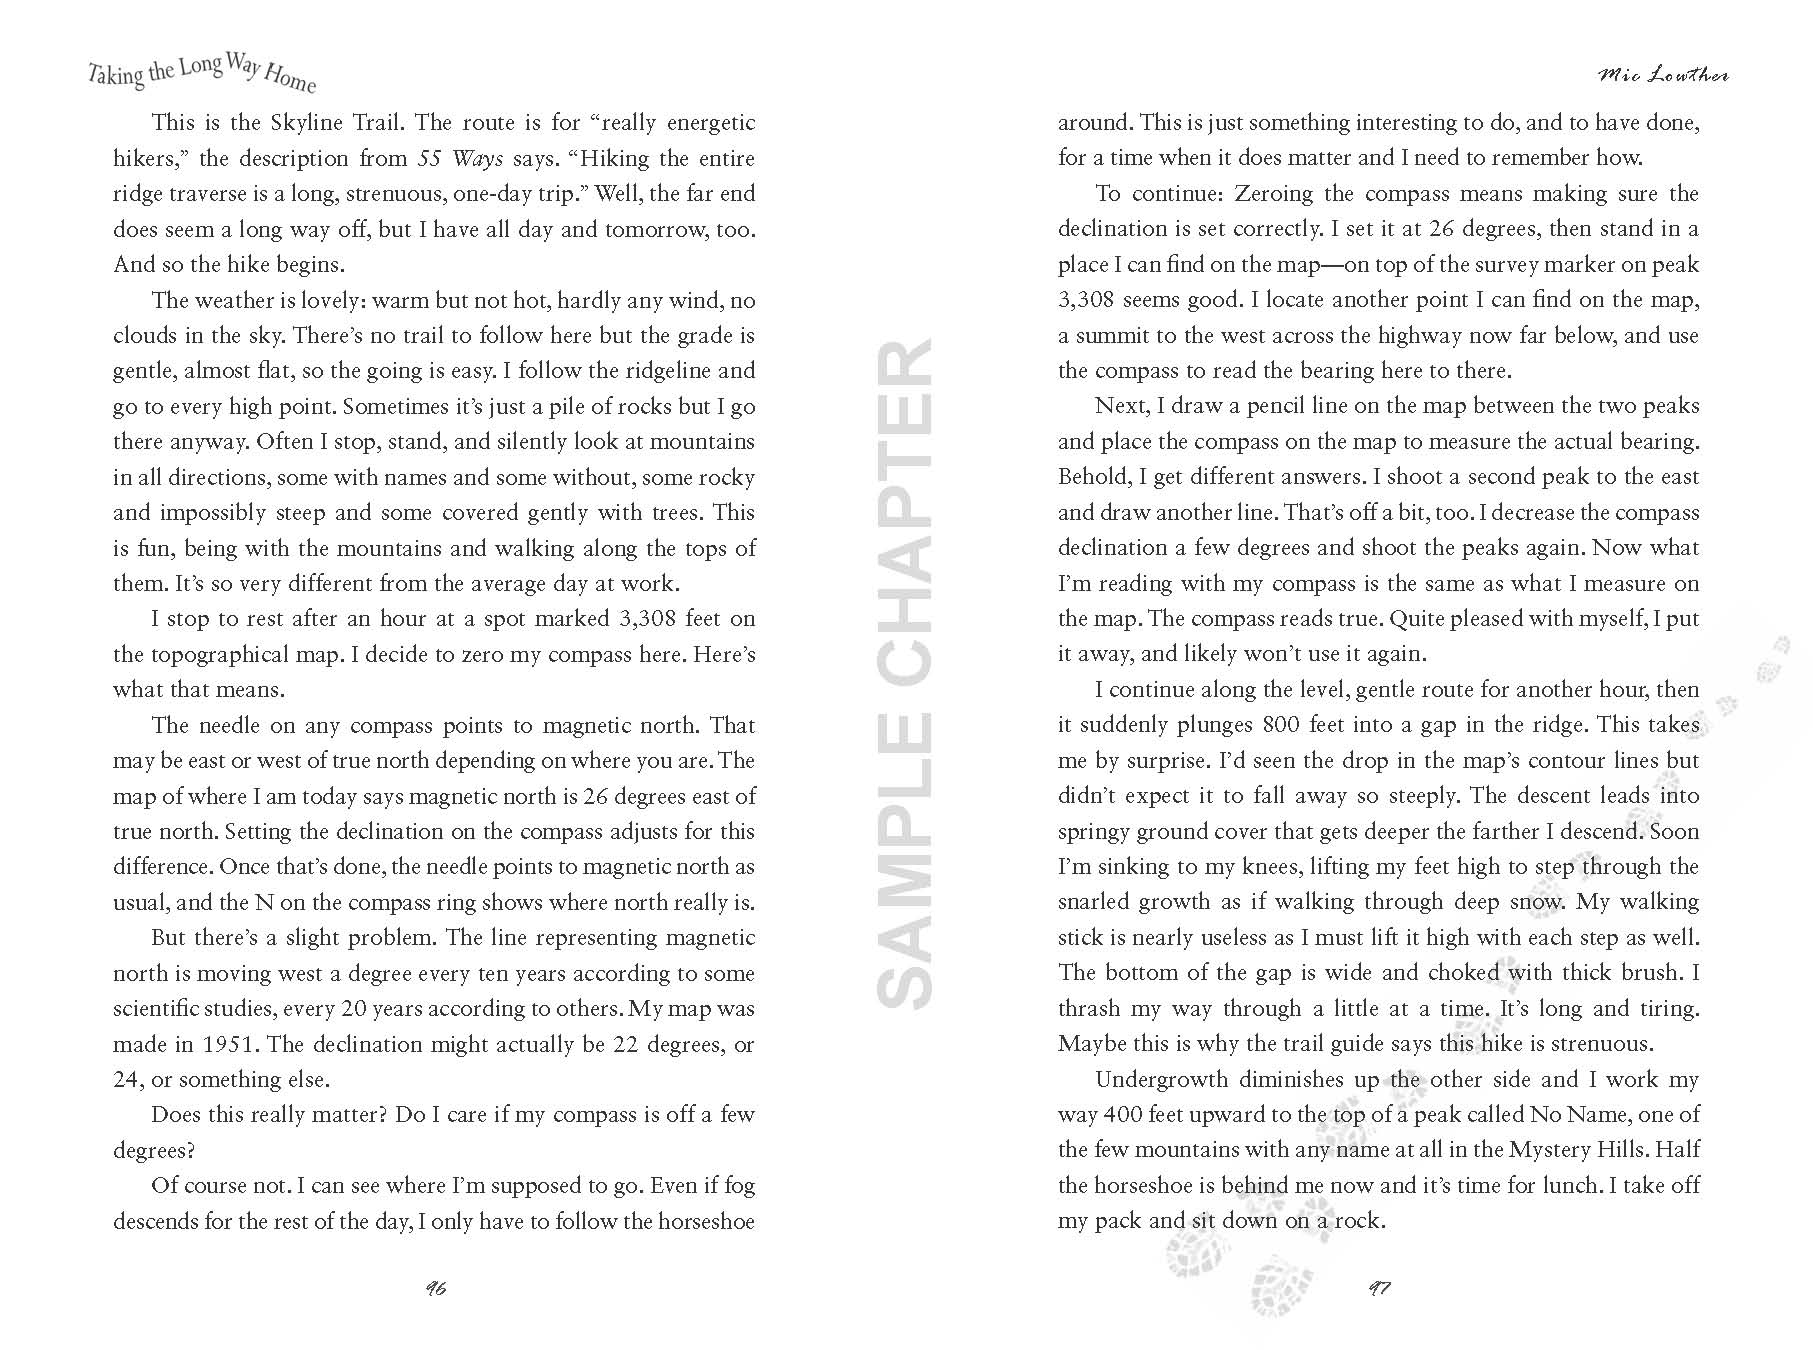 Taking The Long Way Home sample chapter pg 7 & 8